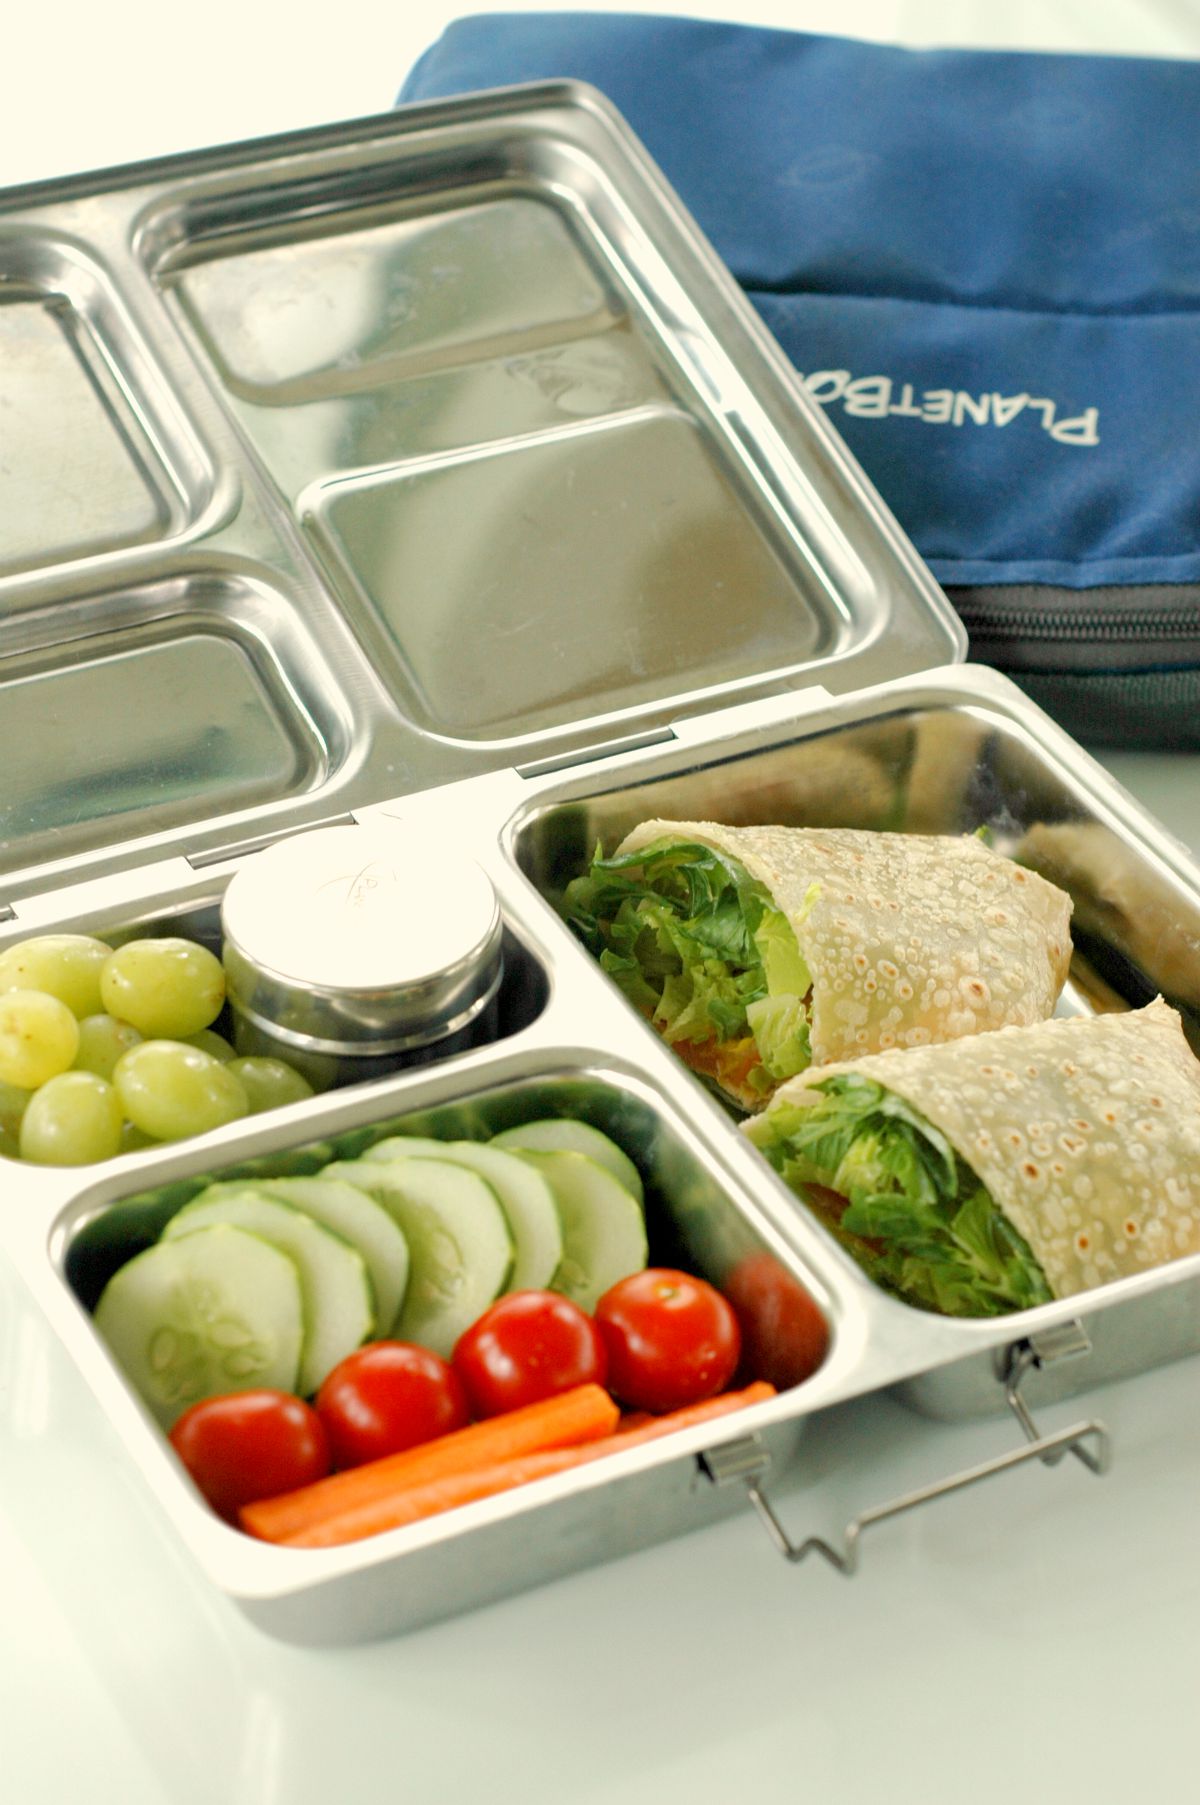 School Lunch Gear Resource Guide :: A detailed brand comparison so